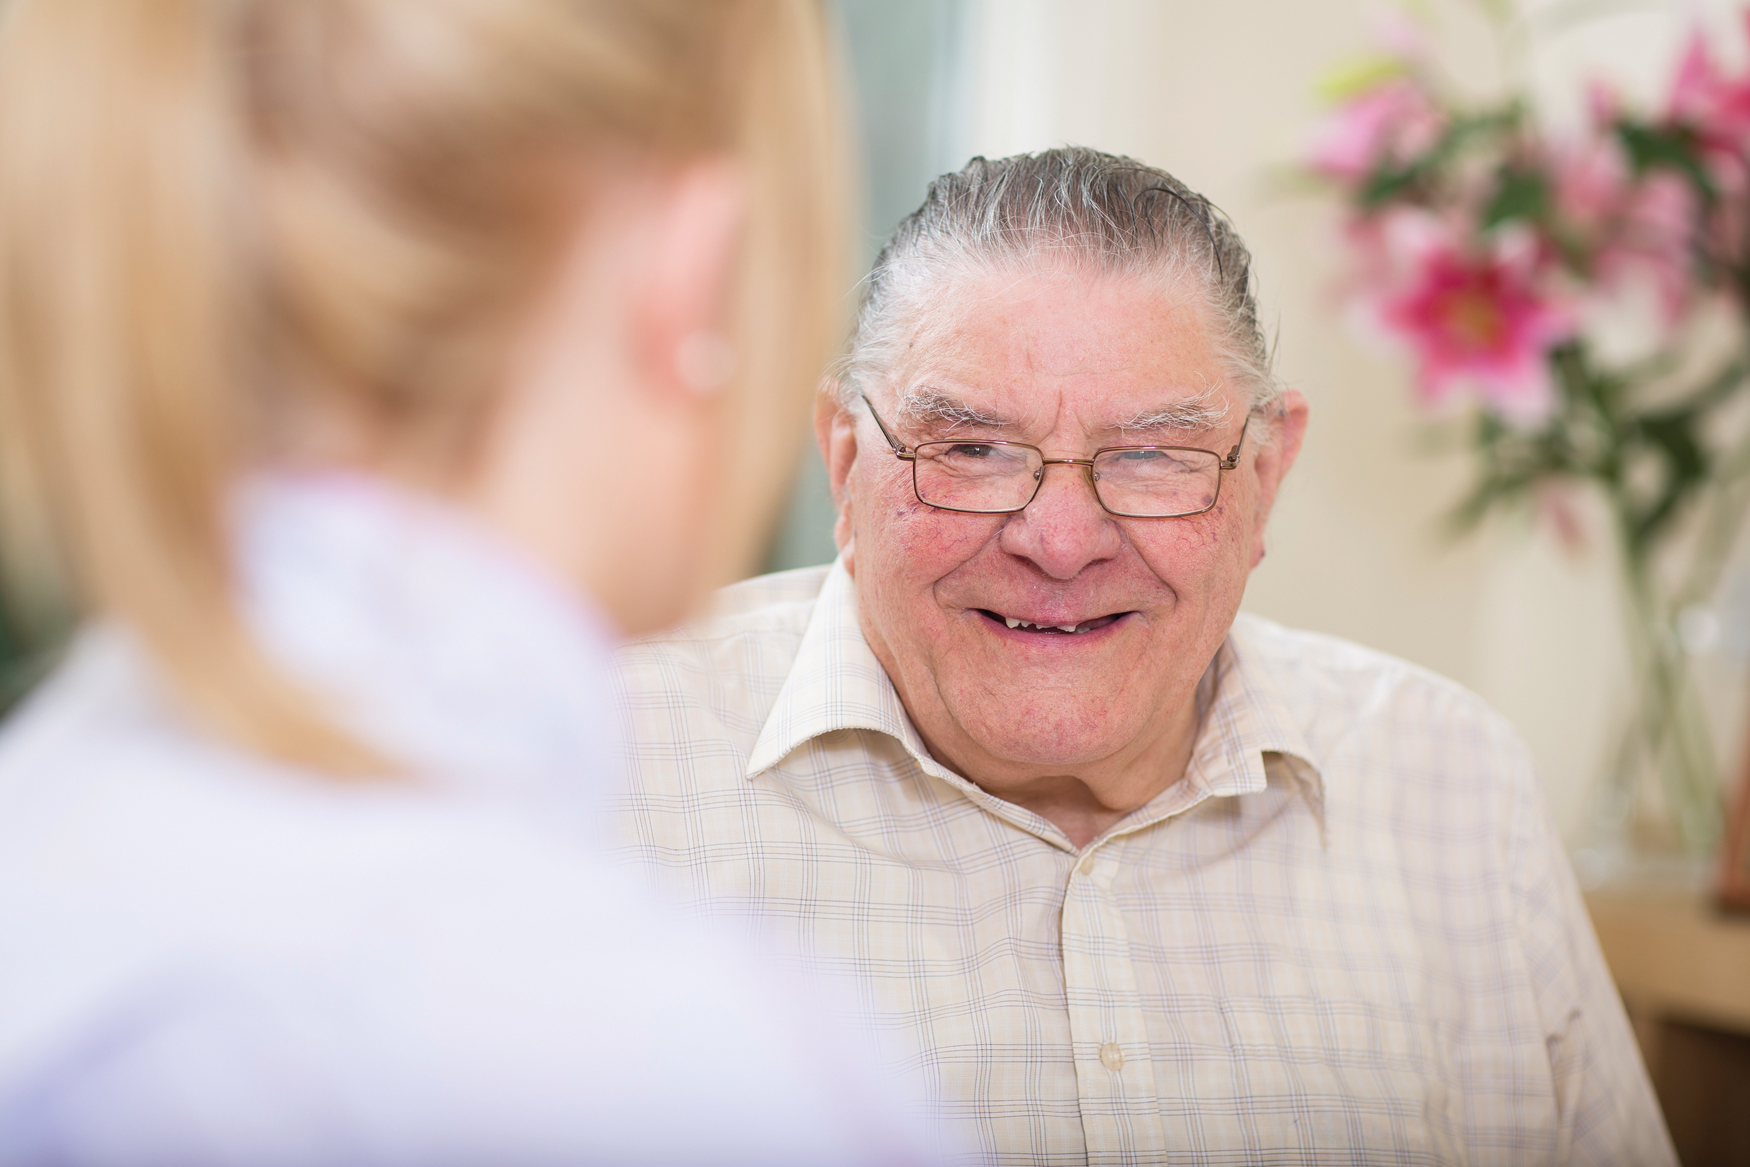 Care assistant vacancies in Coleraine and Ballymoney areas